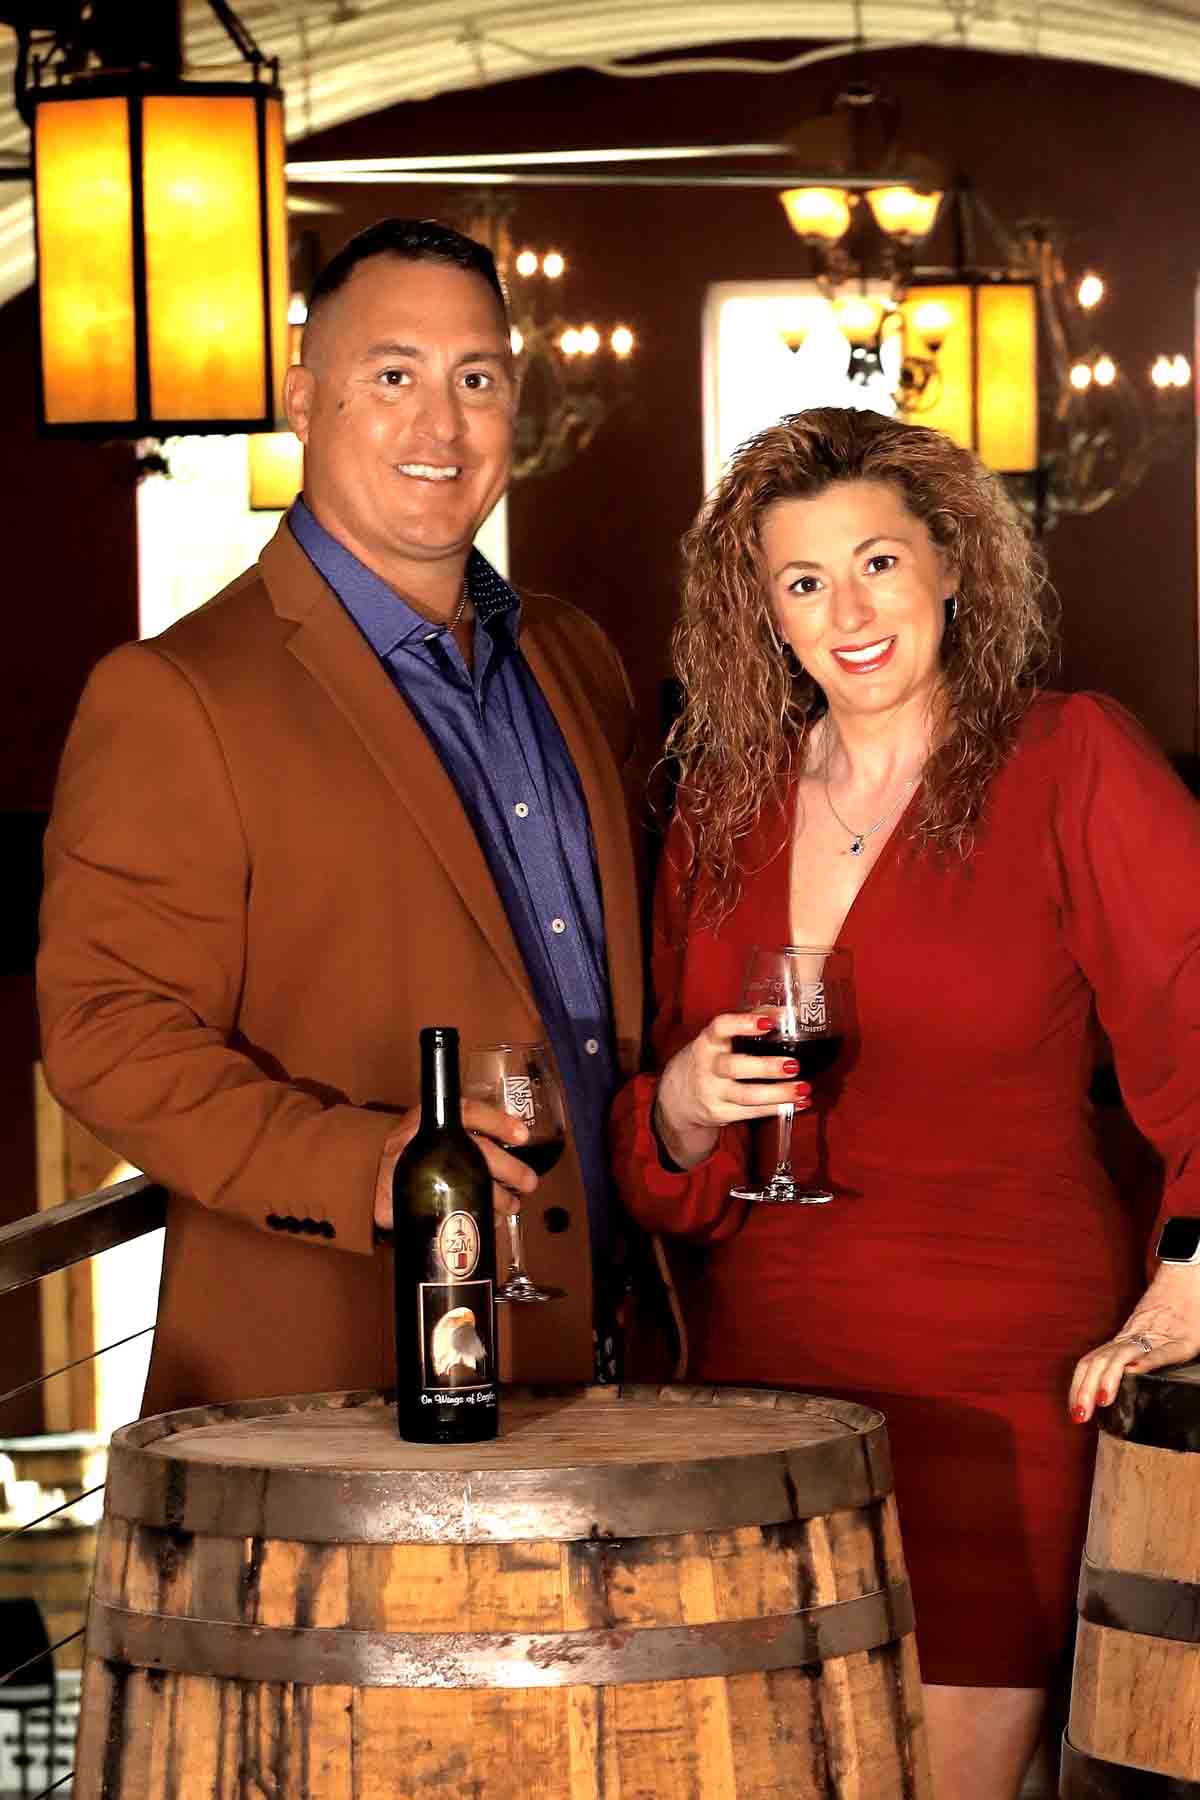 Bryan and Gina Zesiger love to welcome visitors to their tasting room.